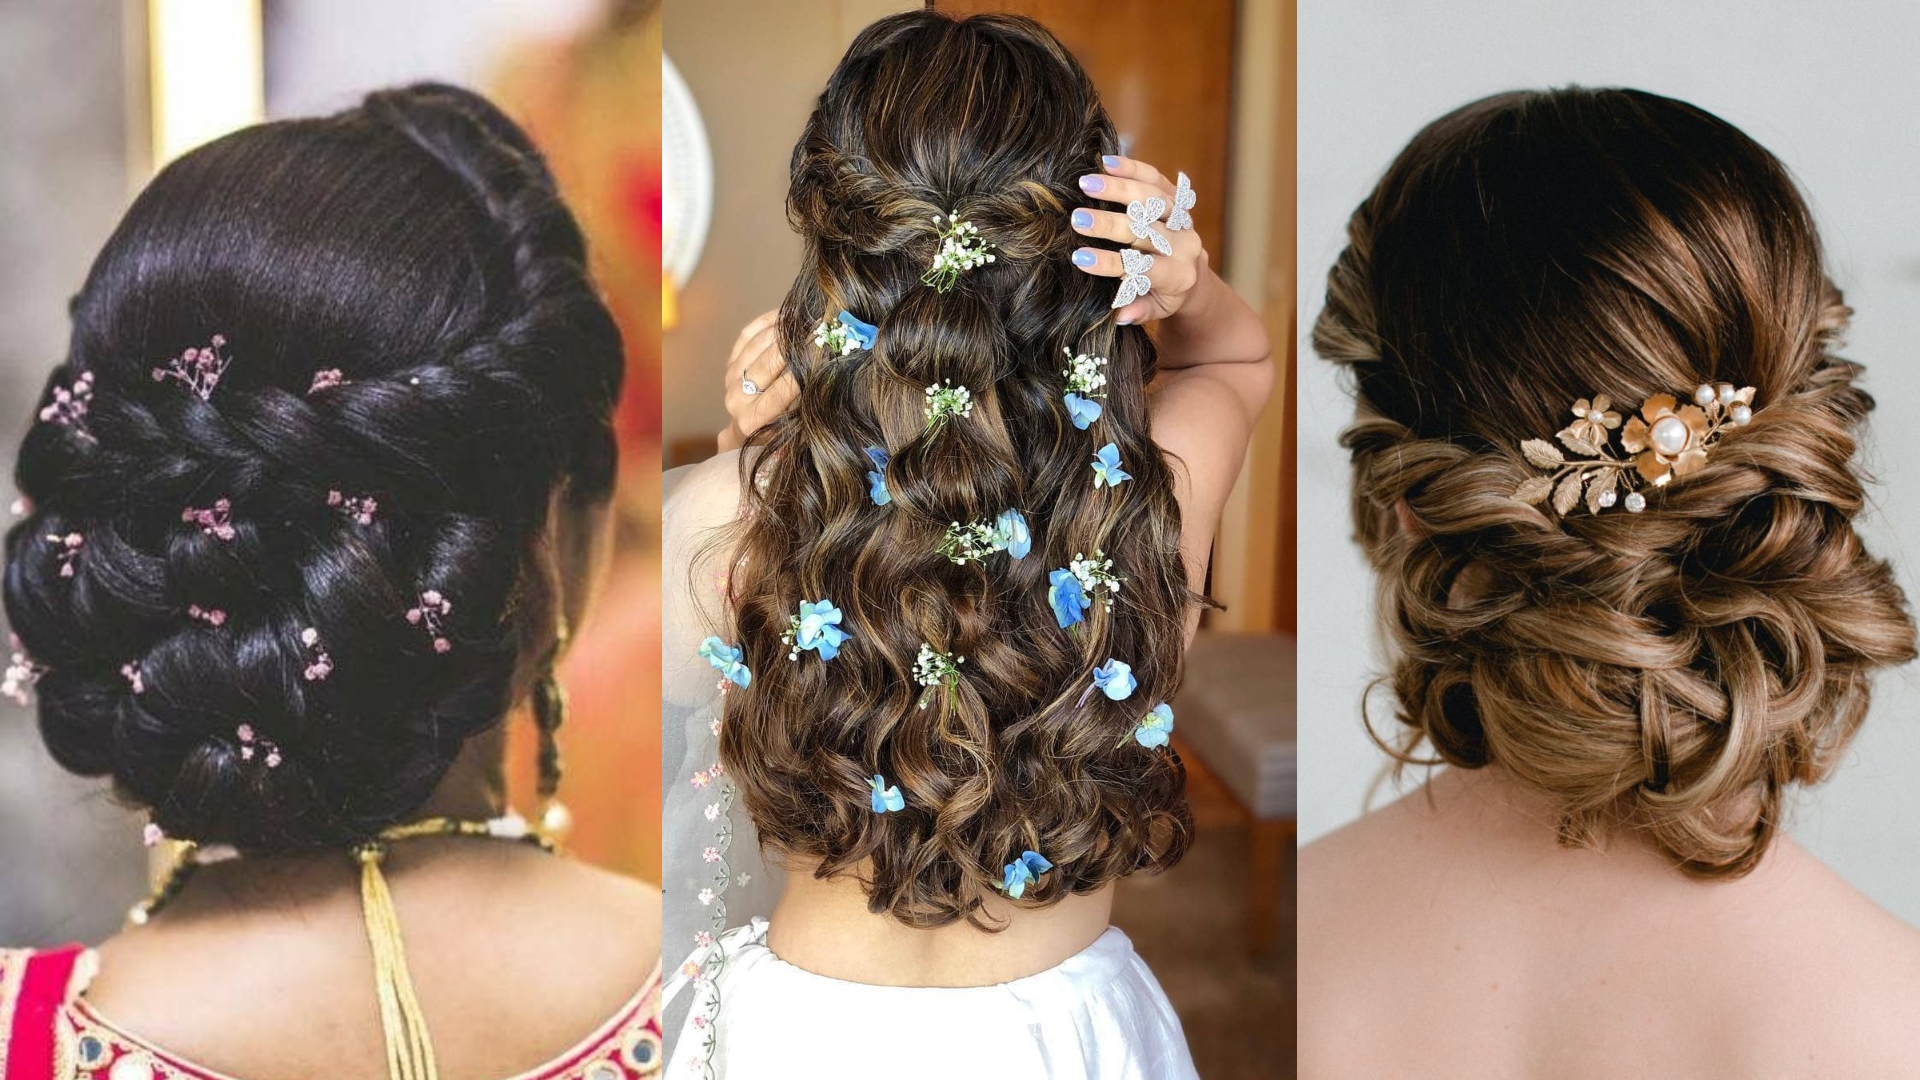 The Best Hairstyles According to Your Wedding Dress Neckline